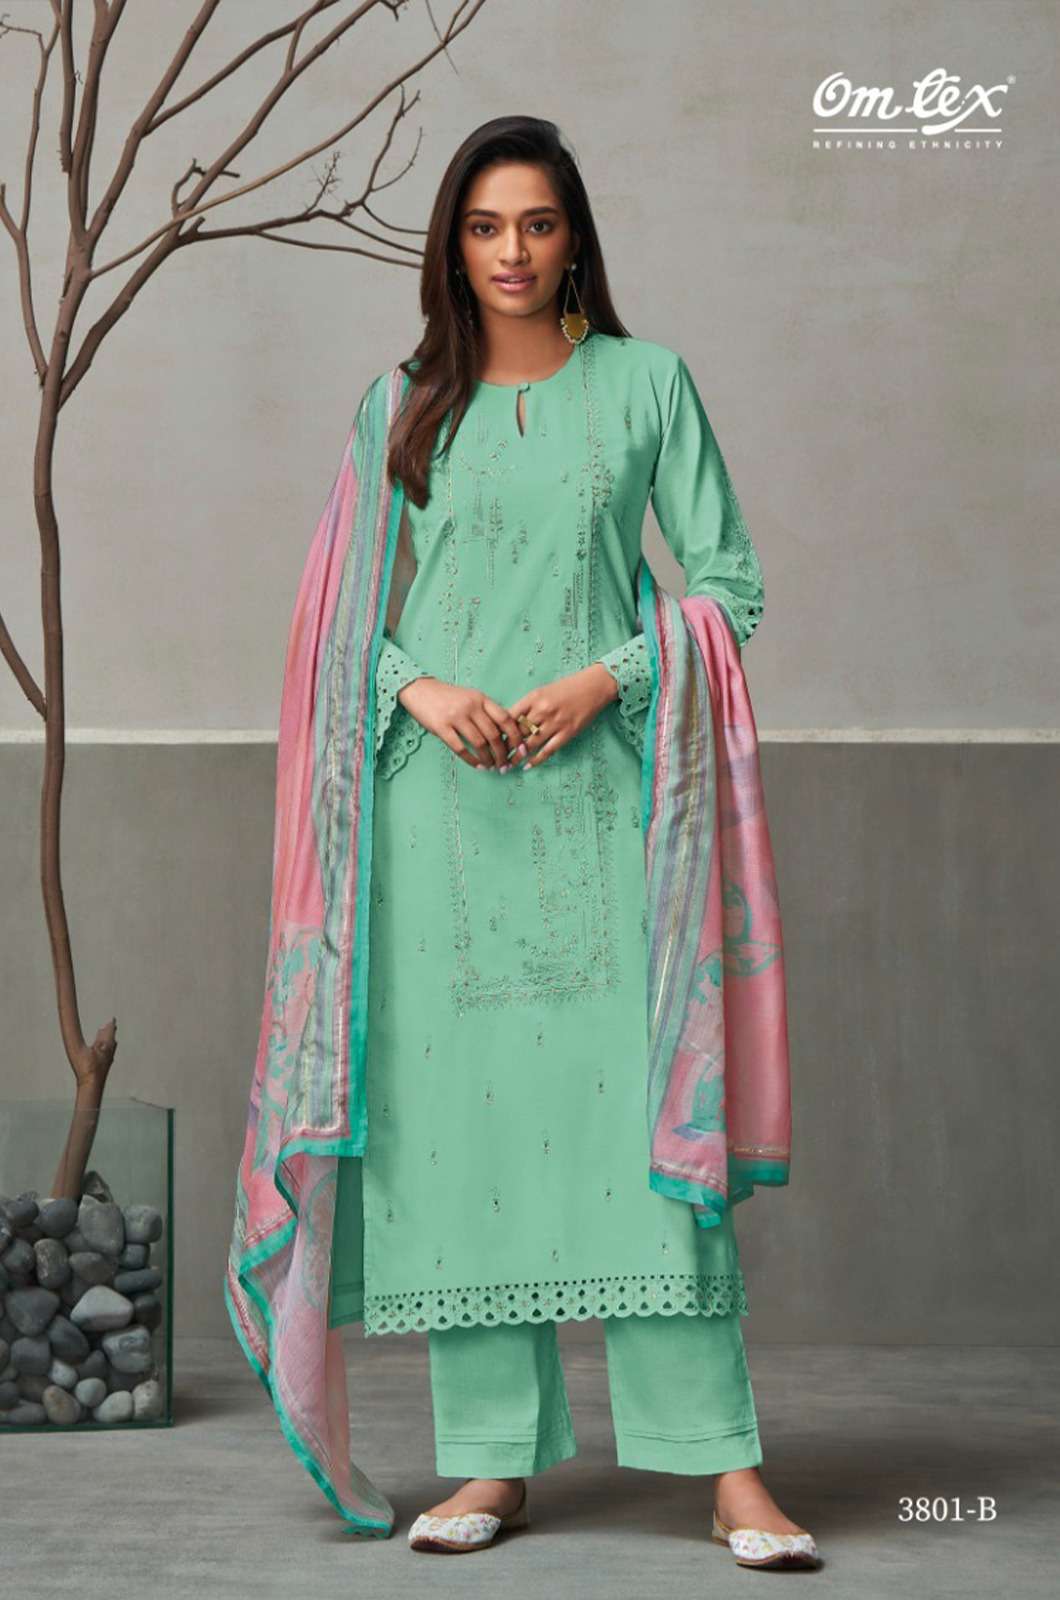 Omtex Gazal LAWN COTTON CUT WORK EMBROIDERY WITH HANDWORK SUIT